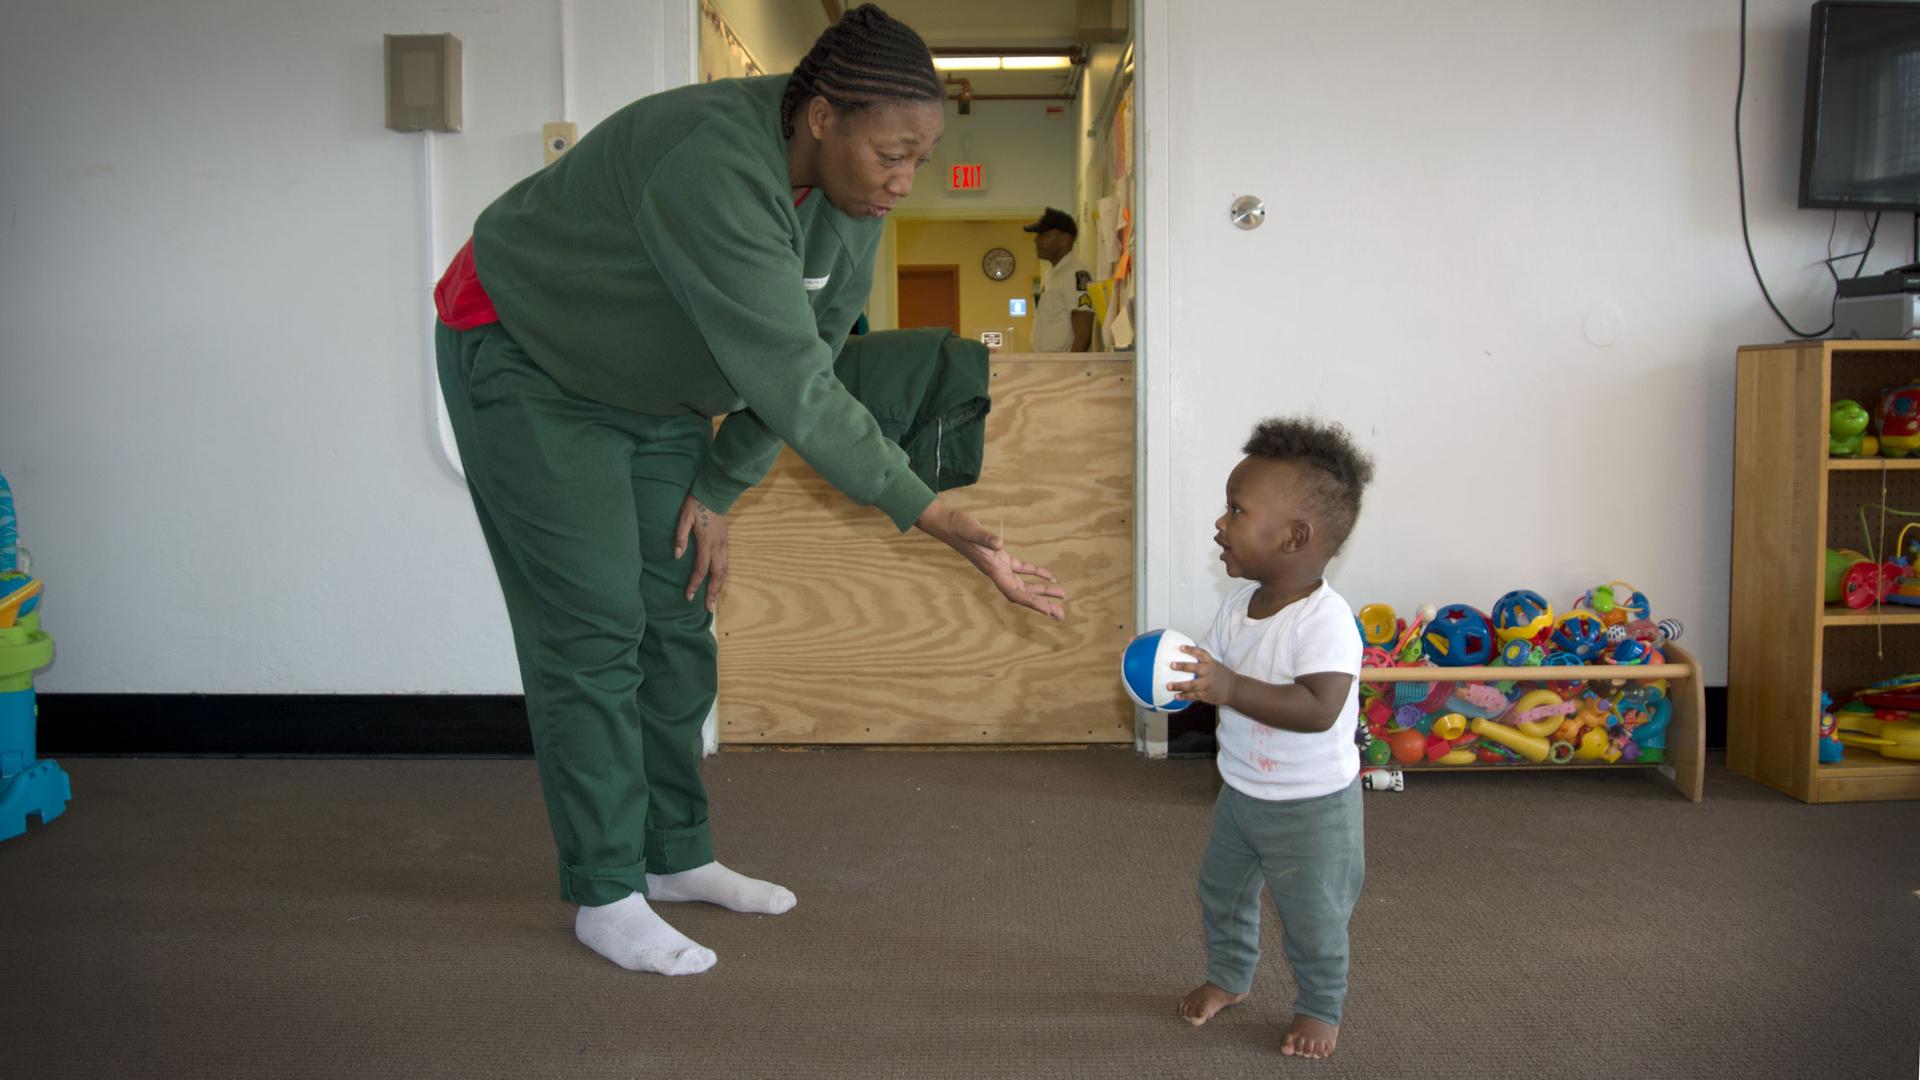 A woman bends over and reaches out a hand at a toddler, who is holding a ball. Behind him is a container of brightly colored children's toys.